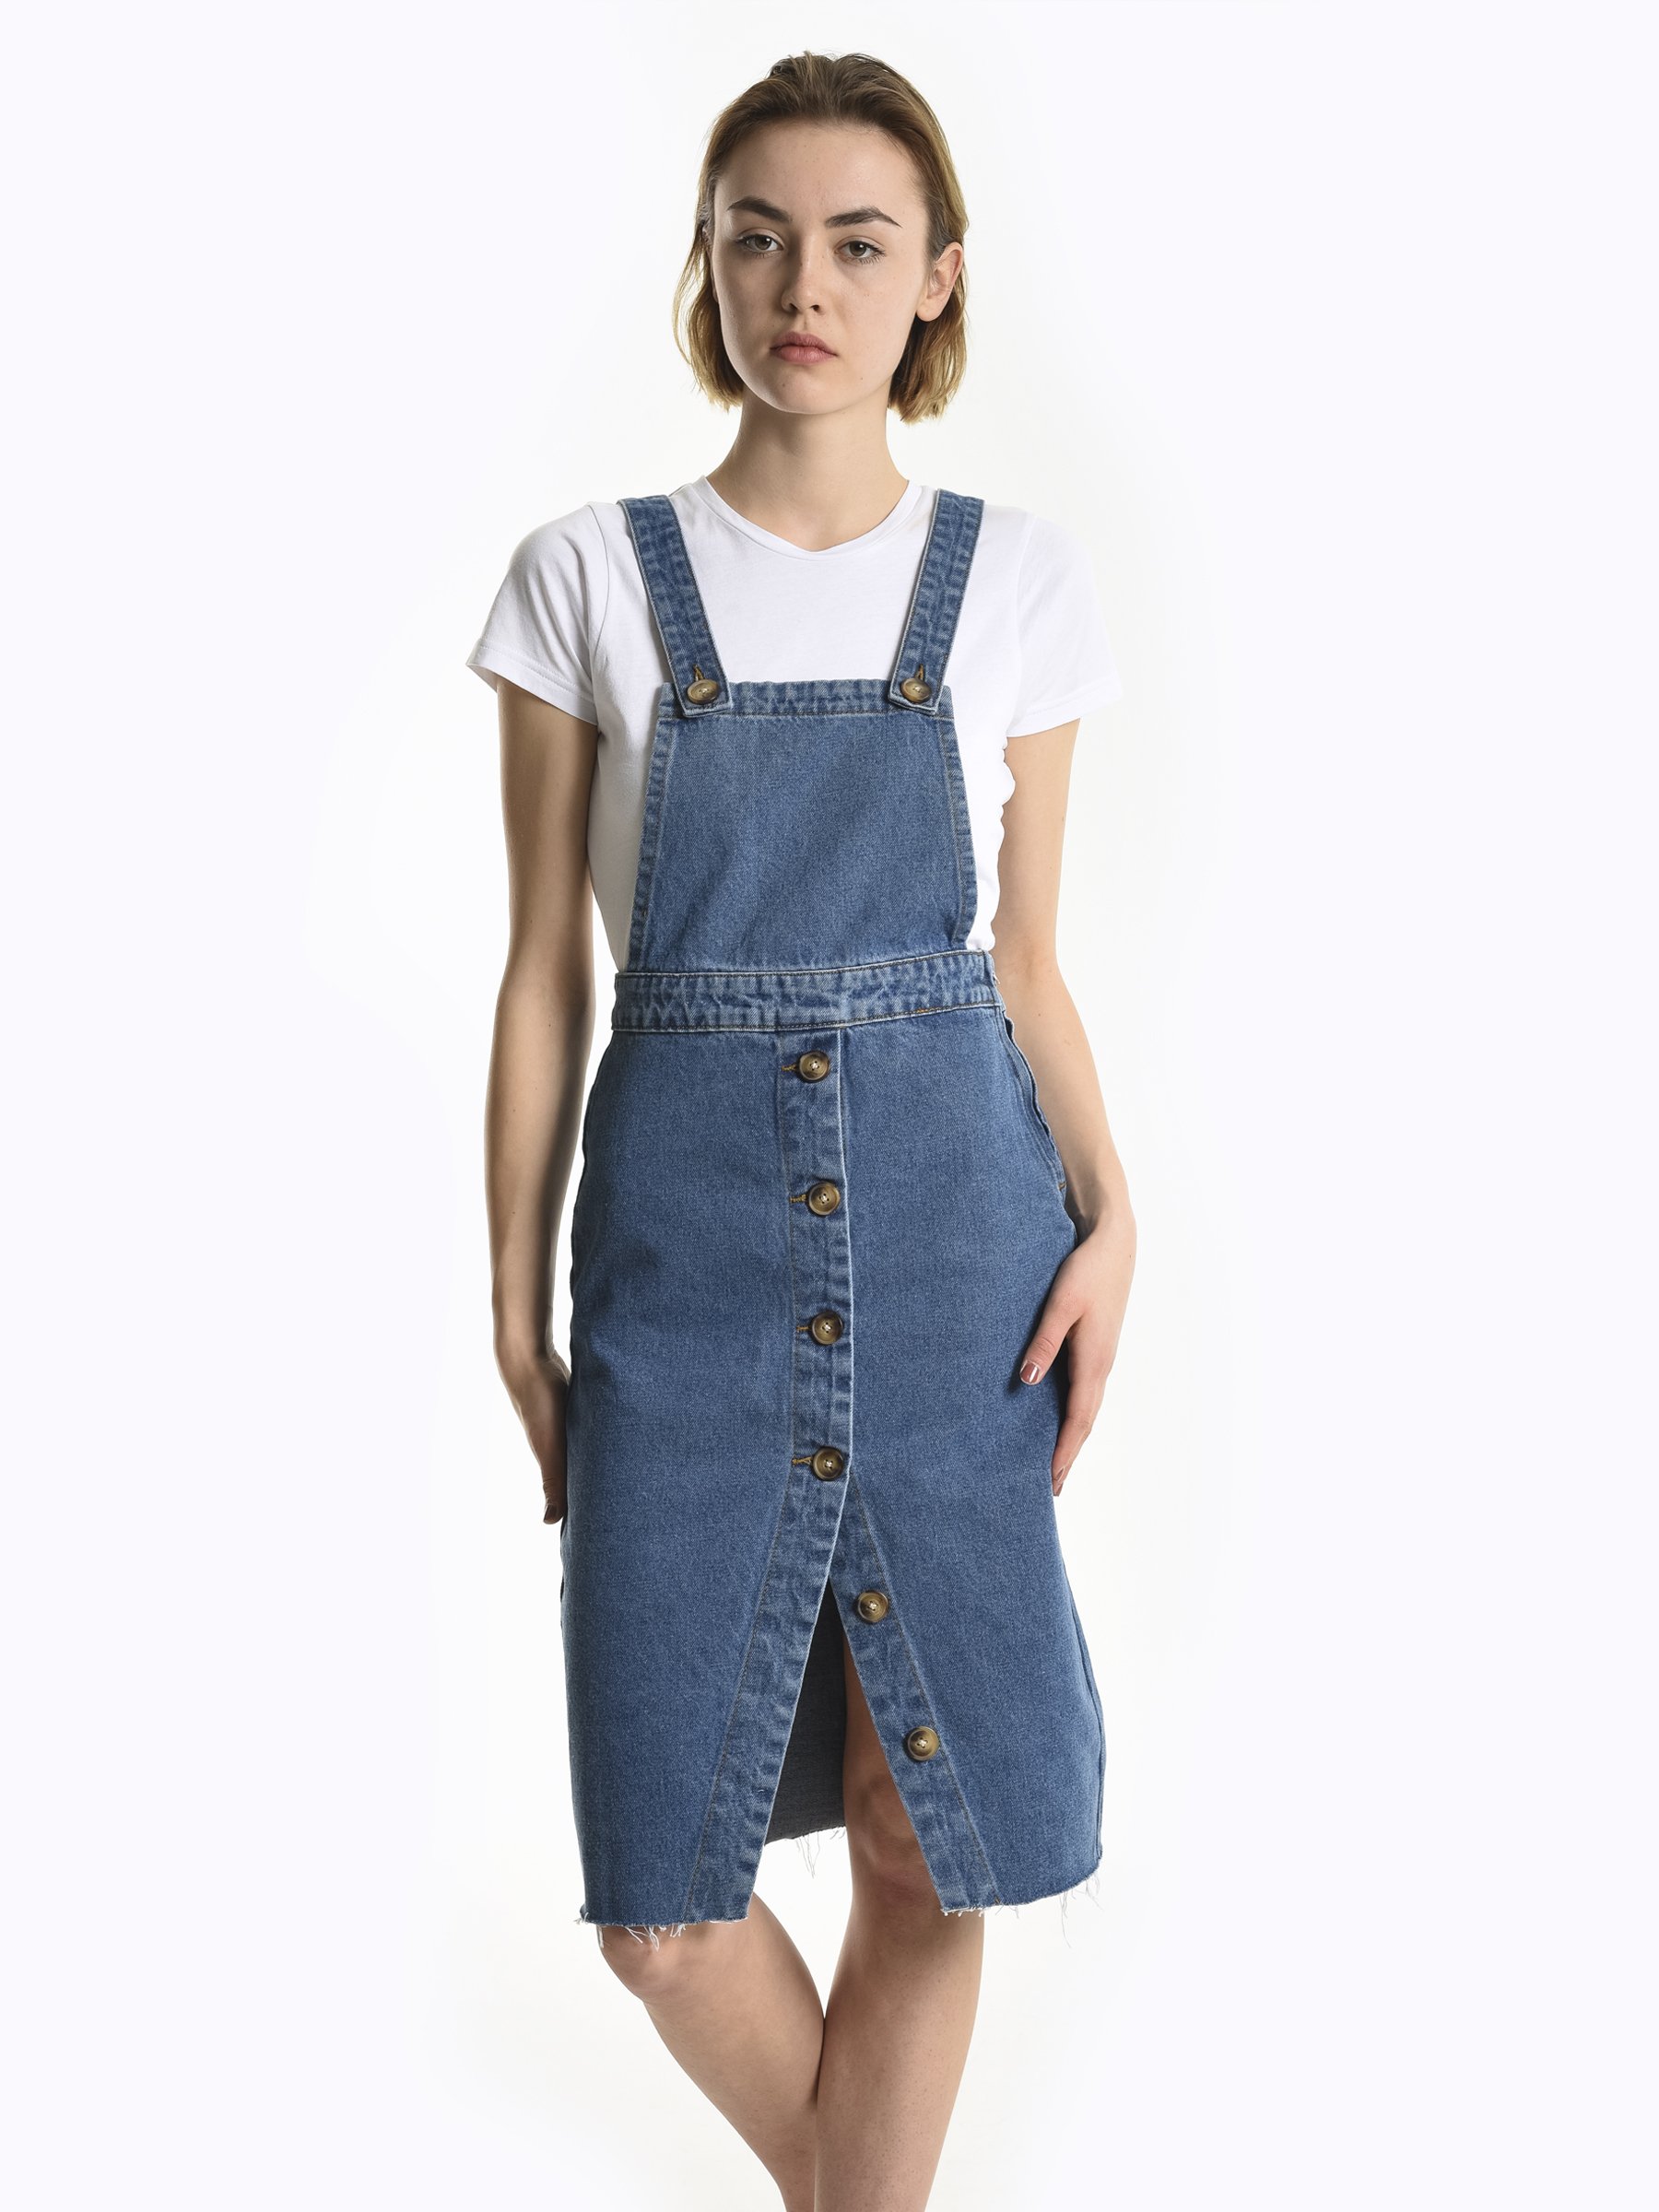 jeans dungaree skirt